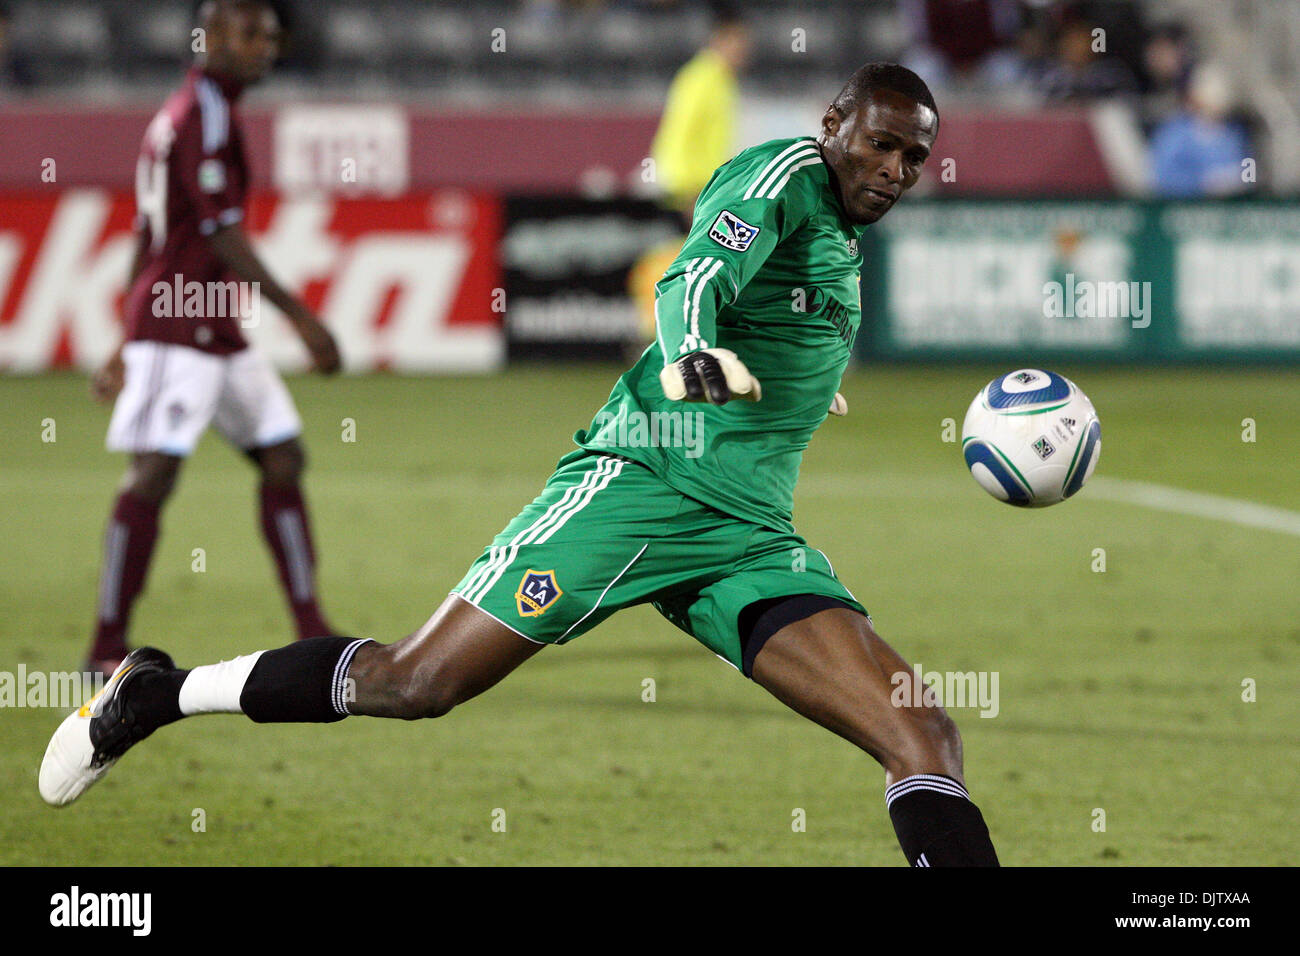 LA Galaxy goalkeeper Donovan Ricketts (1) punts the ball during a 1-0 victory against the Colorado Rapids at Dick's Sporting Goods Park, Commerce City, Colorado. (Credit Image: © Paul Meyer/Southcreek Global/ZUMApress.com) Stock Photo